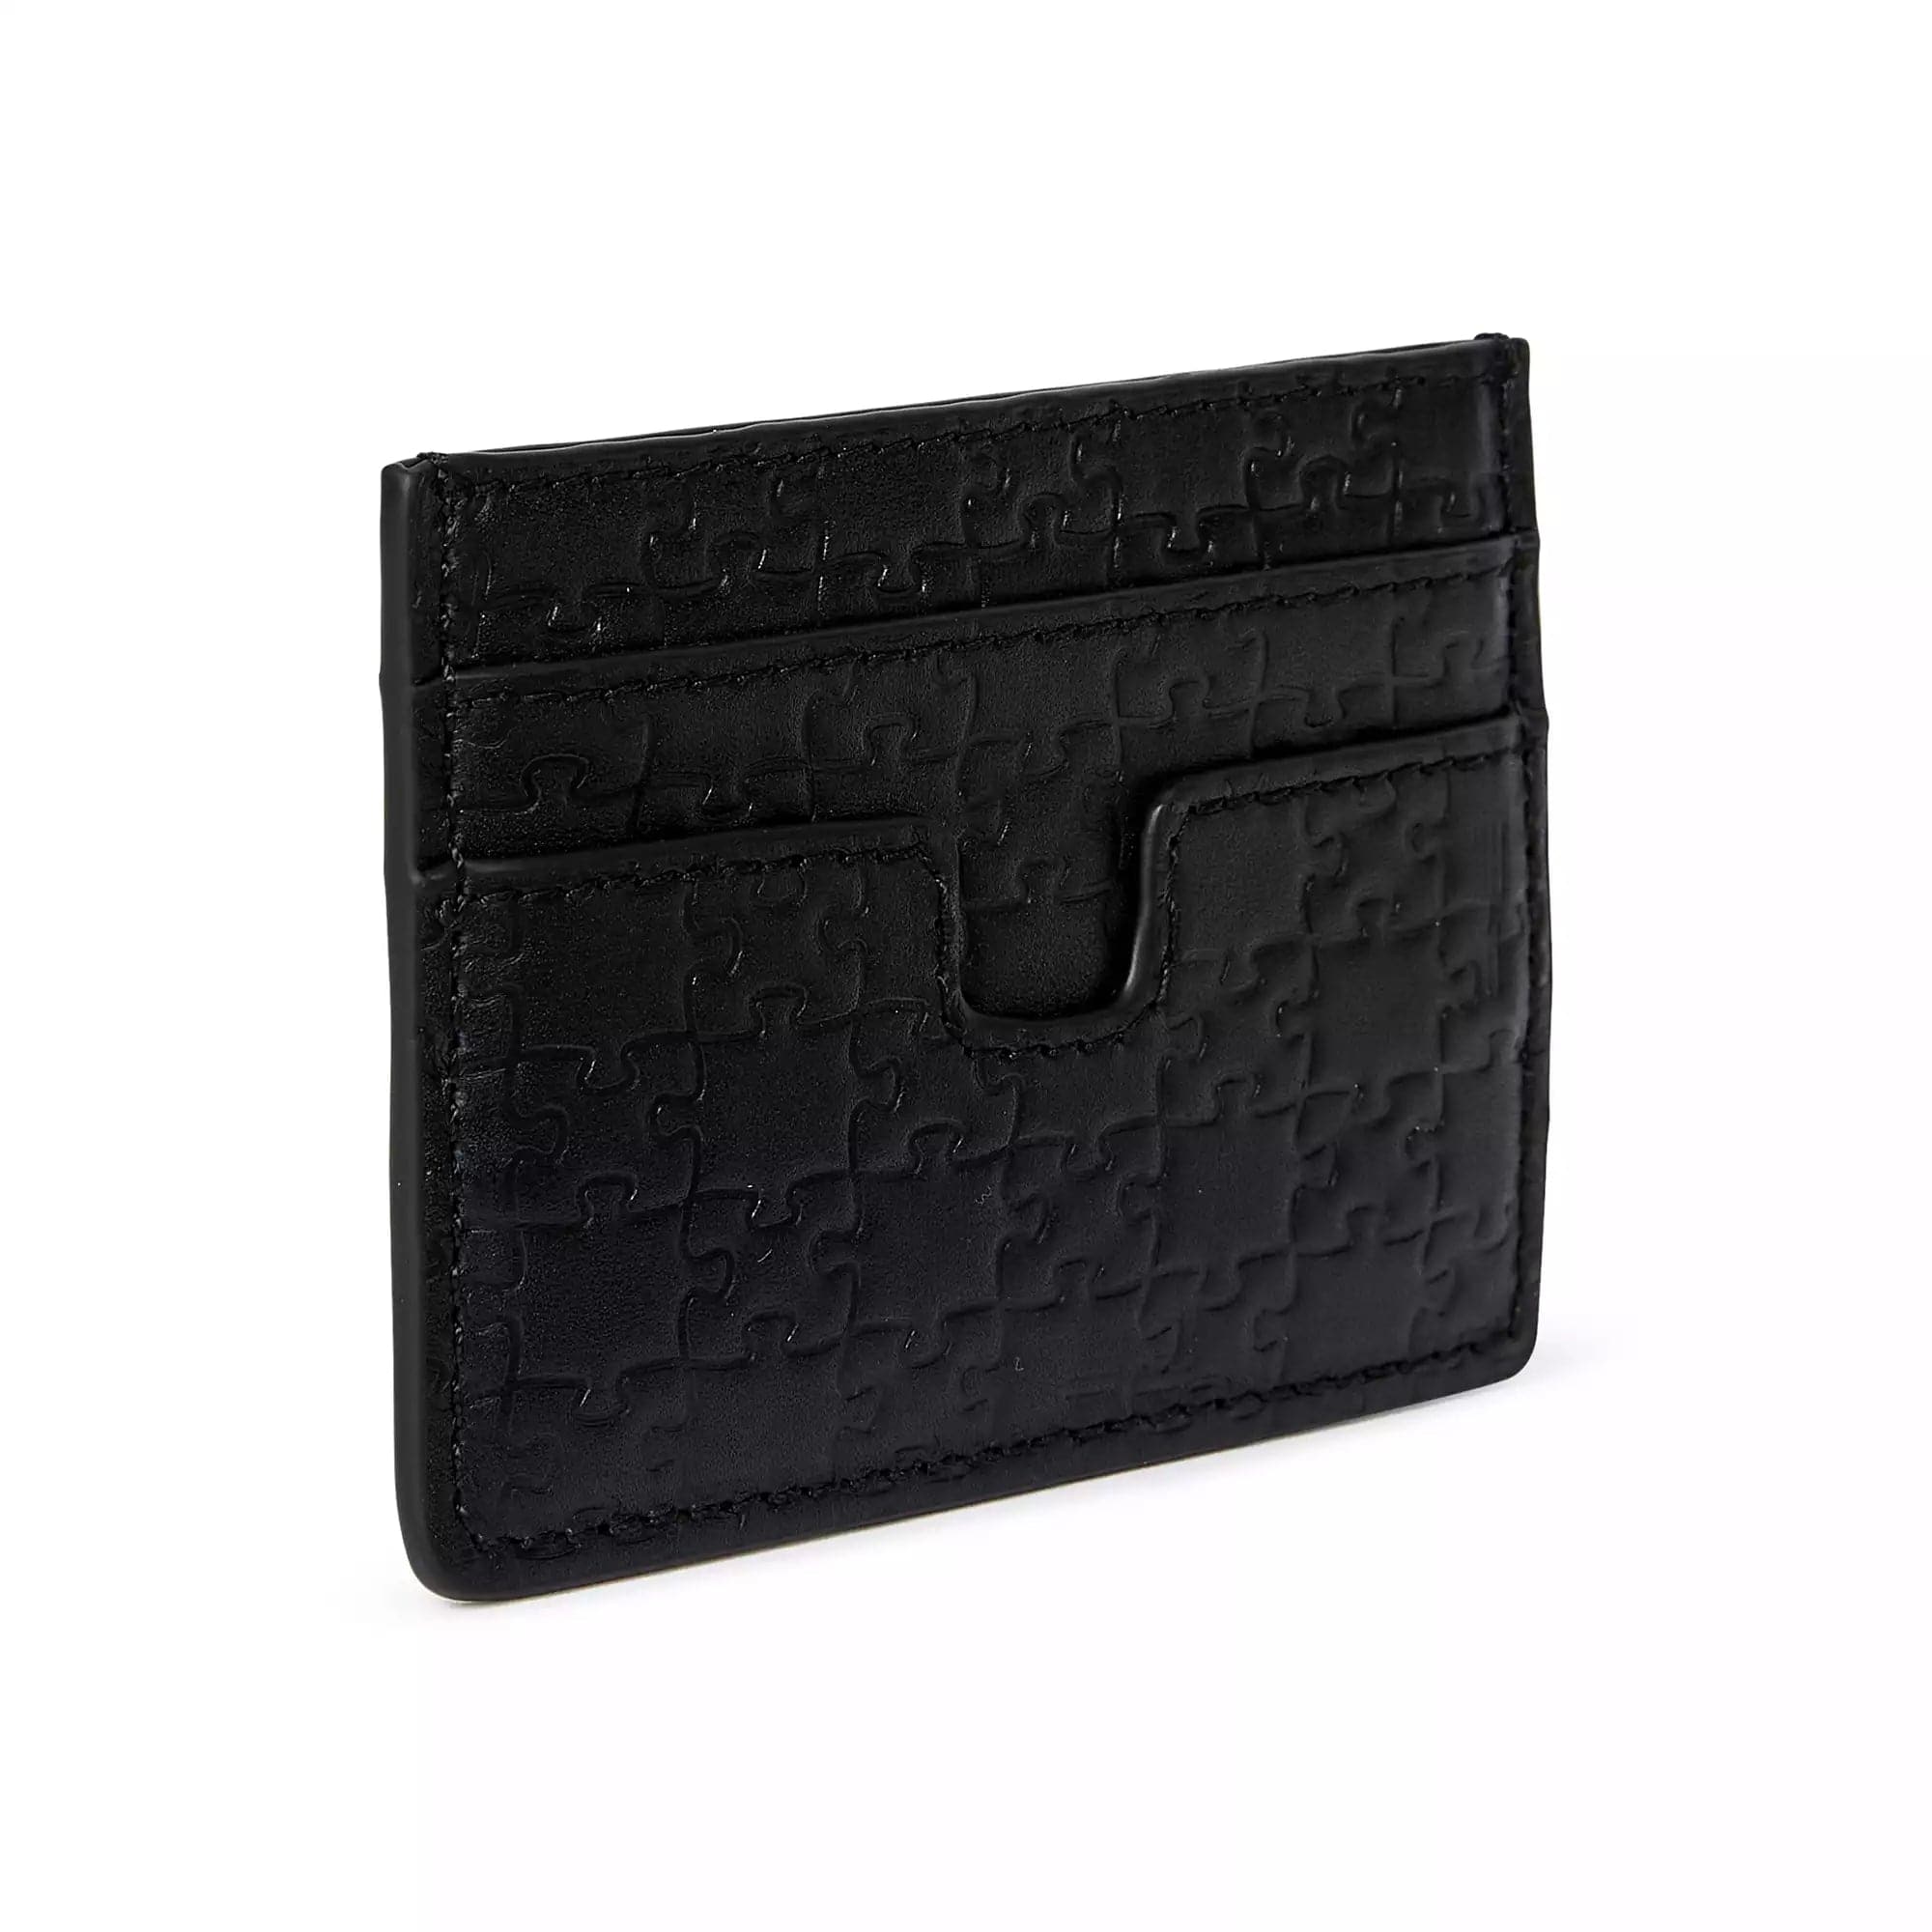 BISI Jigsaw Cardholder - EXPERIENCE OUR QUALITY FORYOURSELF